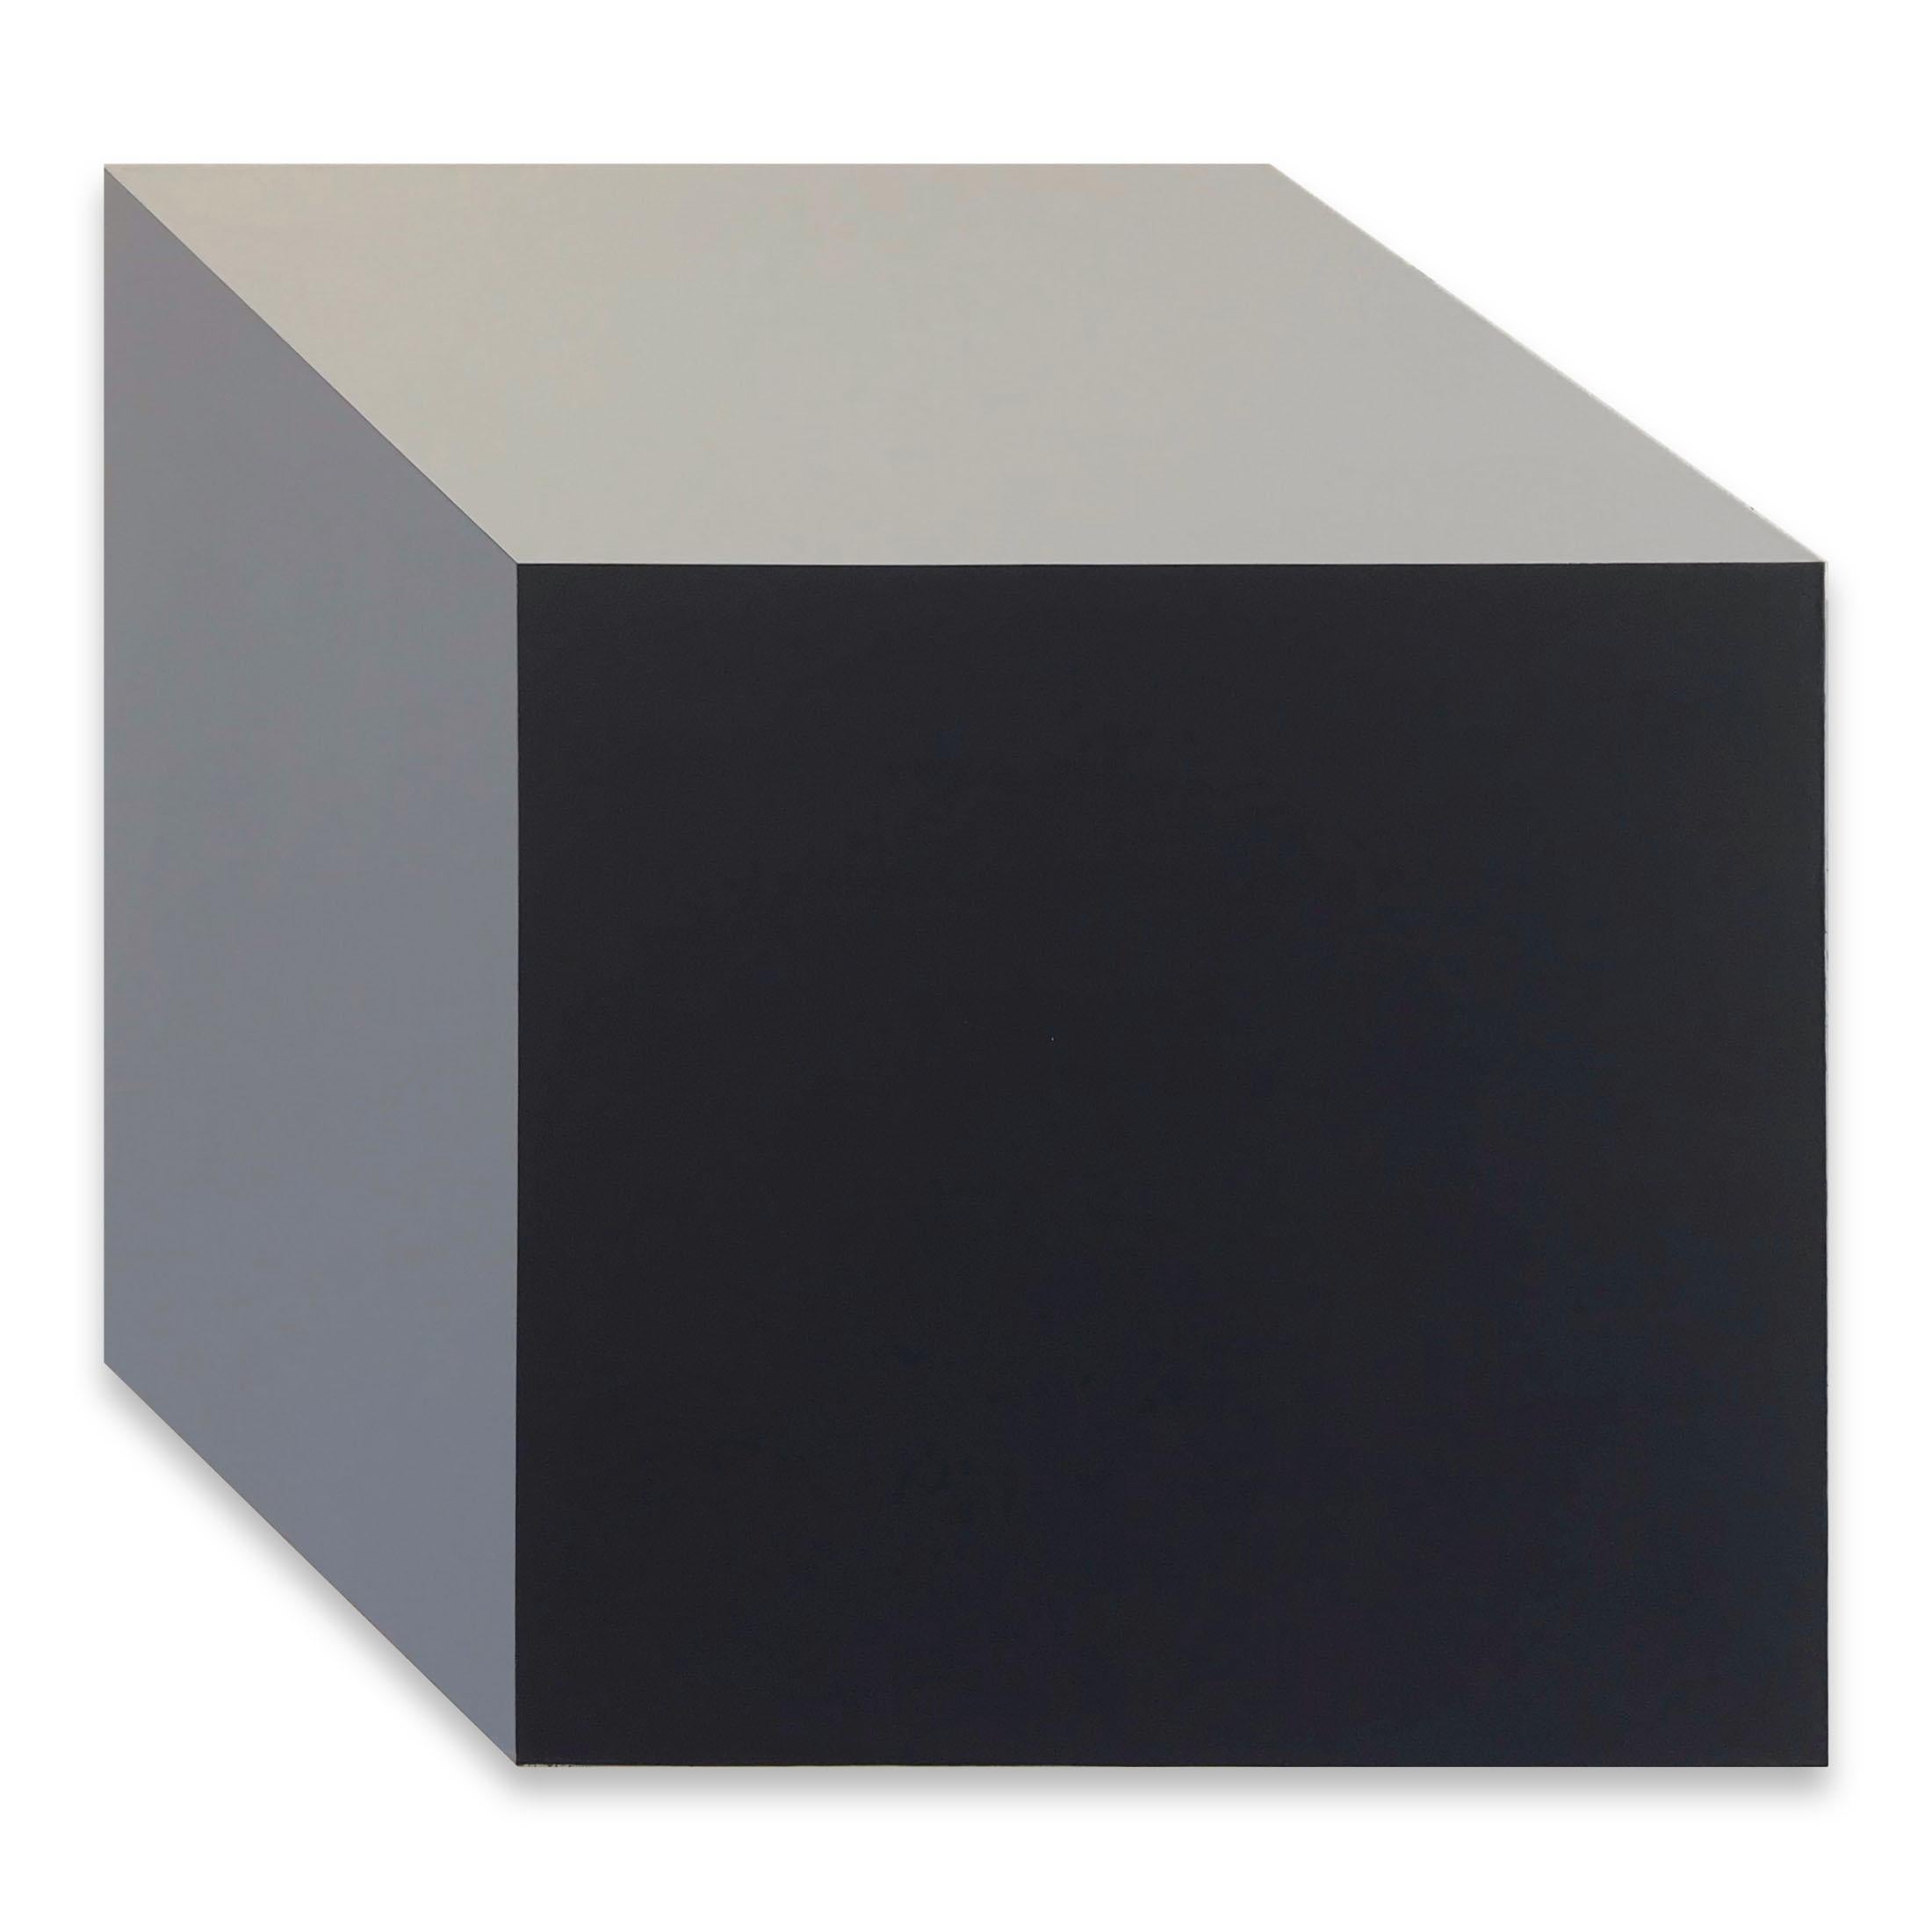 Black only you III (Abstract Painting)

Acrylic on aluminium core panel - Unframed.

Hallard works with the themes of space and geometry, manipulating images and arrangements of objects in order to challenge the perception of the viewer.
